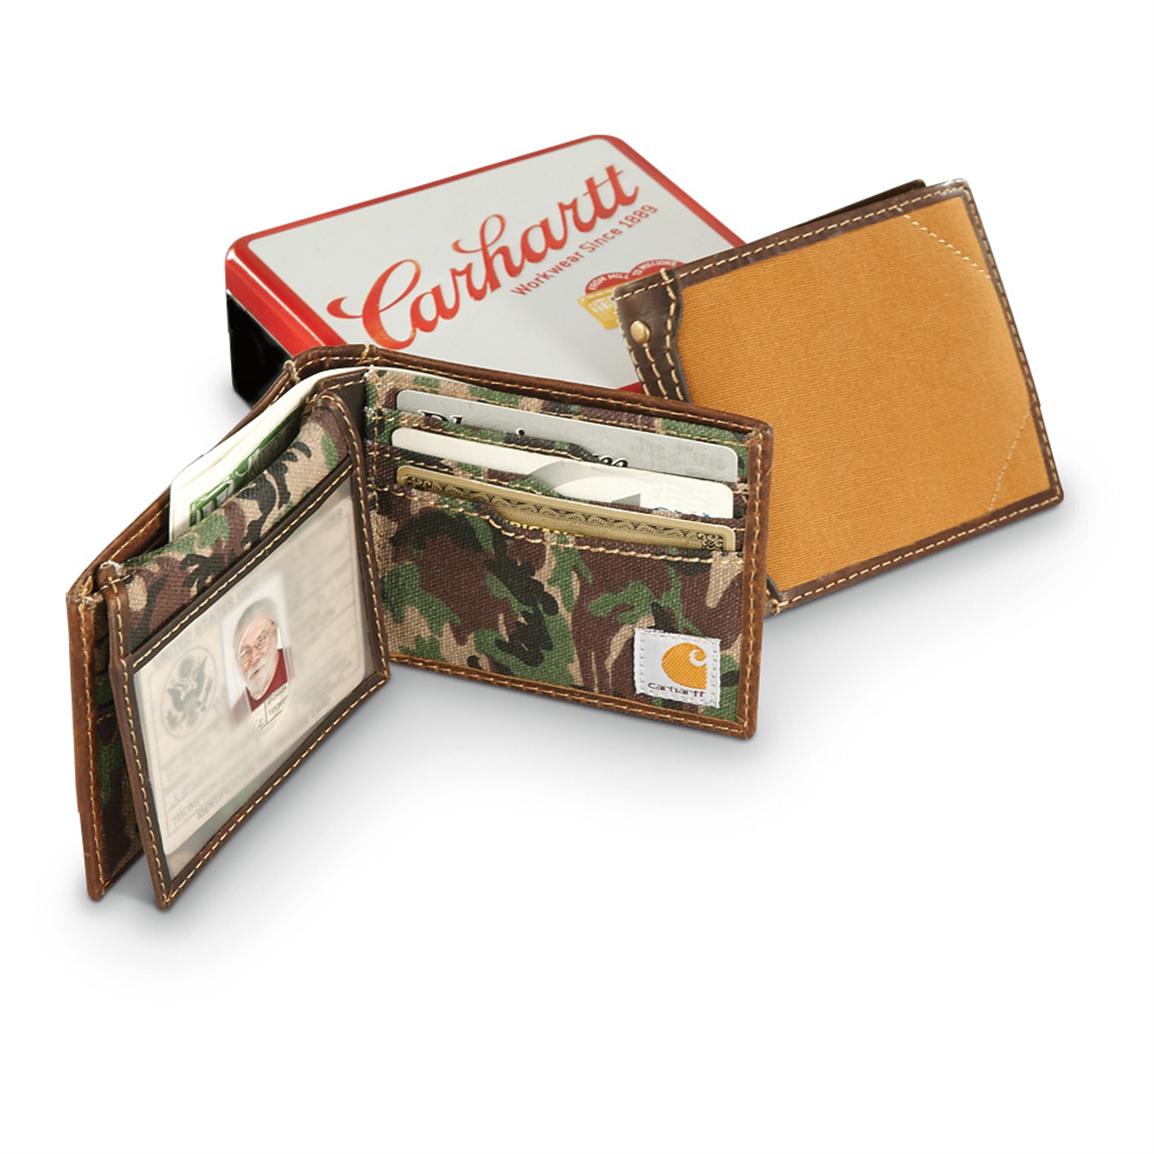 Carhartt Canvas Passcase Wallet - 425086, Wallets at Sportsman's Guide